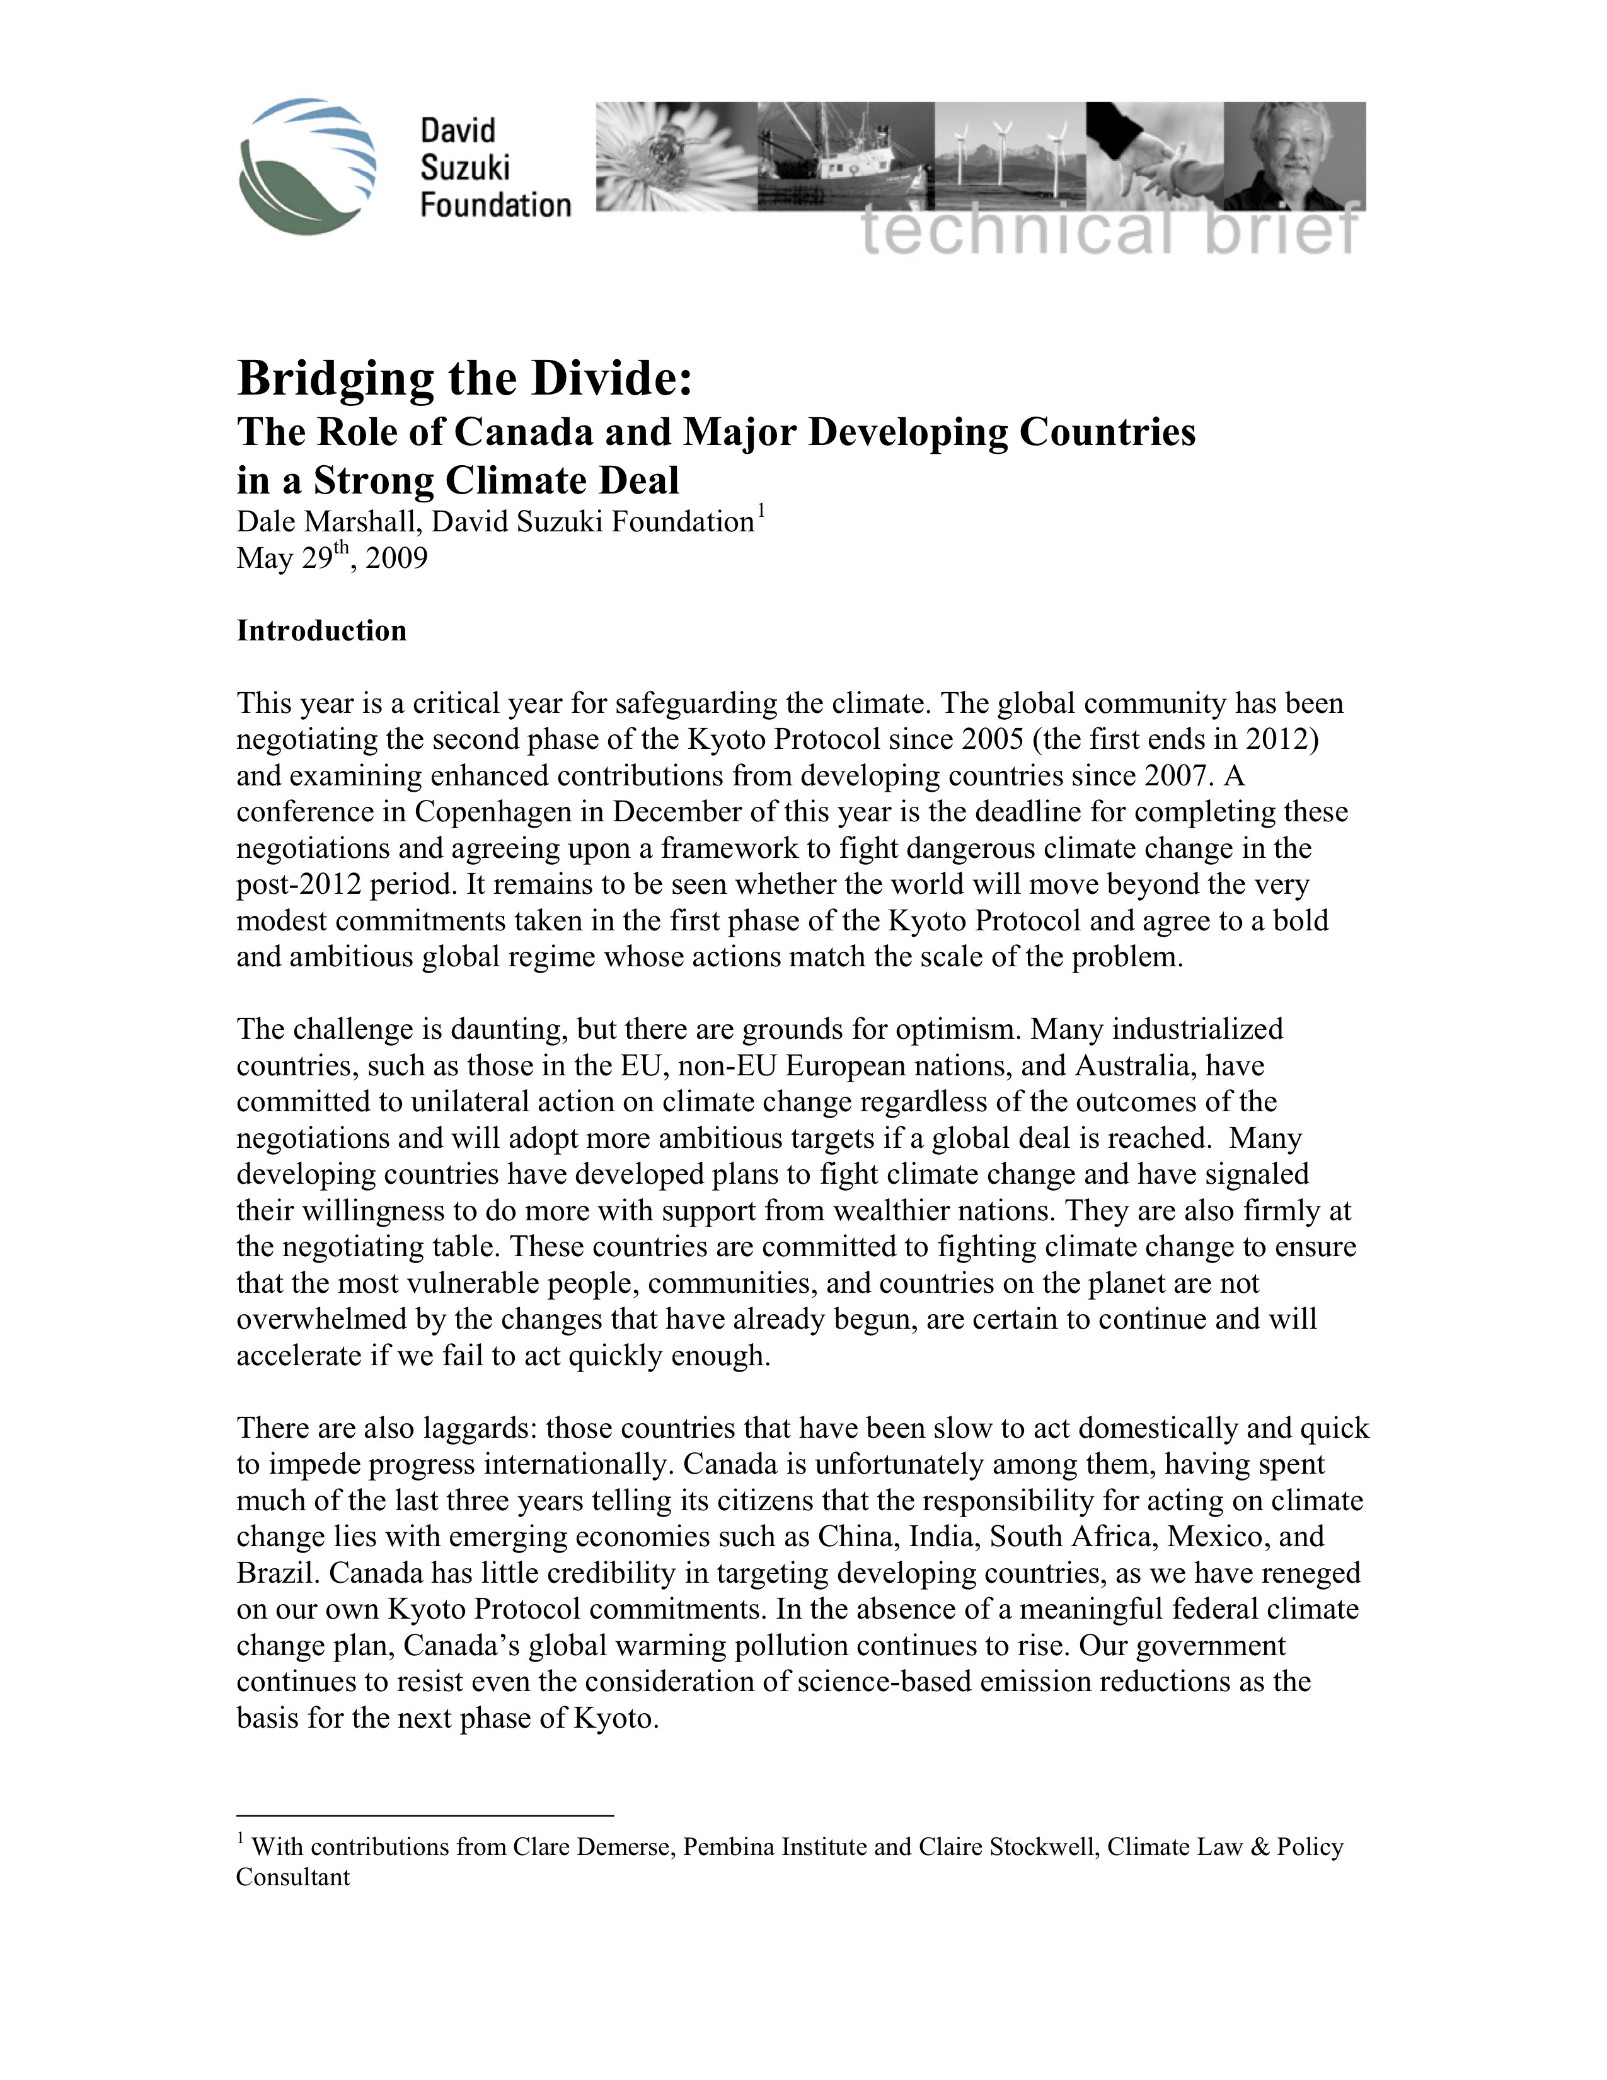 Bridging the Divide: The Role of Canada and Major Developing Countries in a Strong Climate Deal